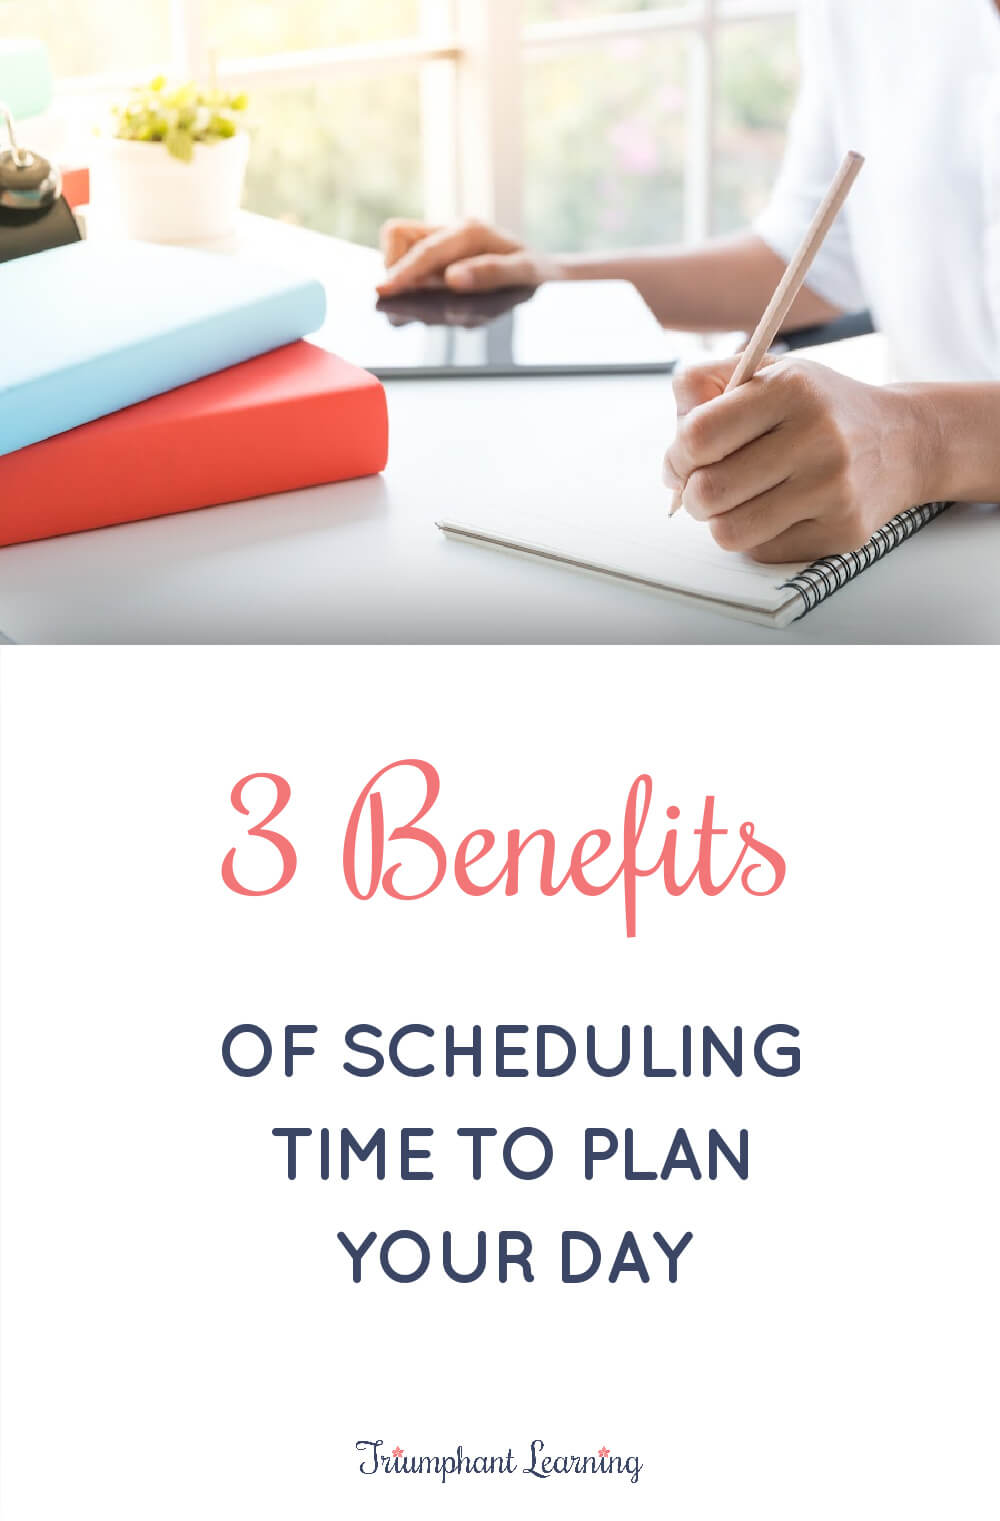 You can feel in control instead of allowing your day to control you. Learn the three benefits of having dedicated time to plan out your day. via @TriLearning